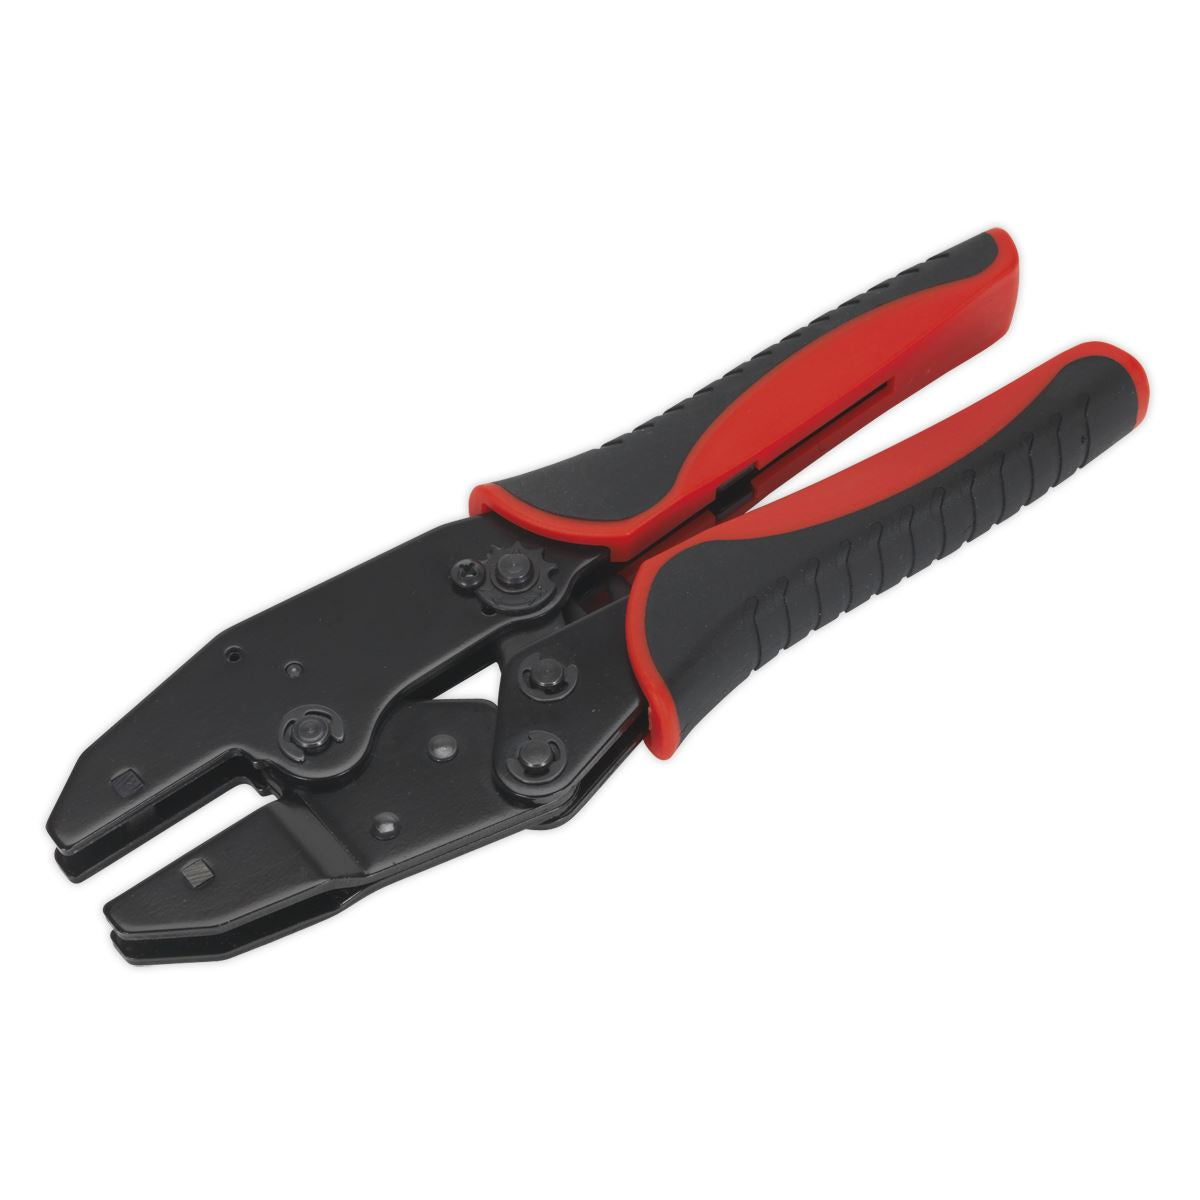 Sealey Ratchet Crimping Tool without Jaws